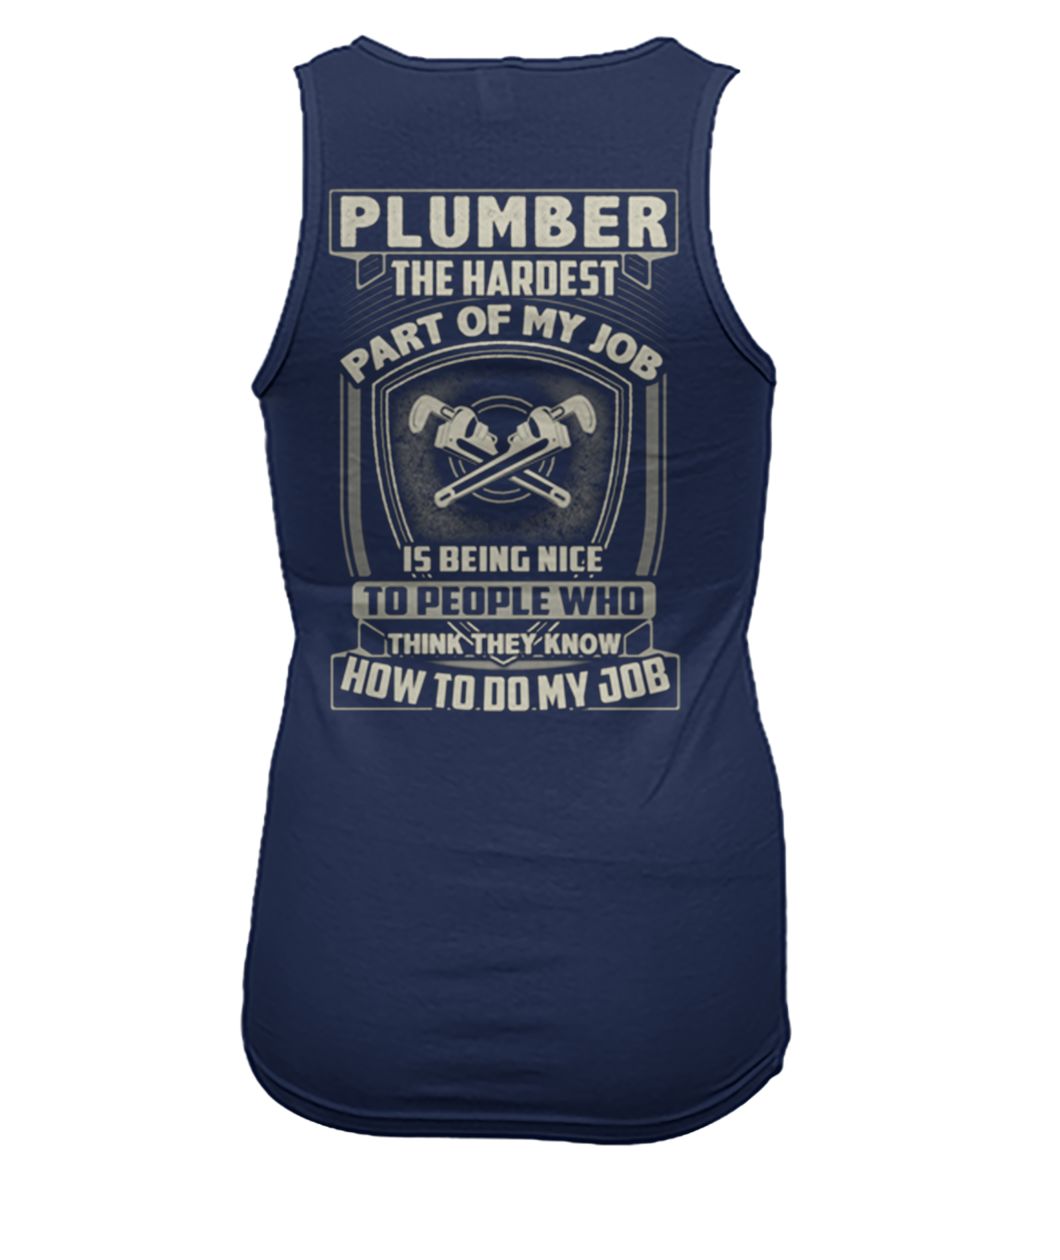 Plumber the hardest part of my job is being nice women's tank top